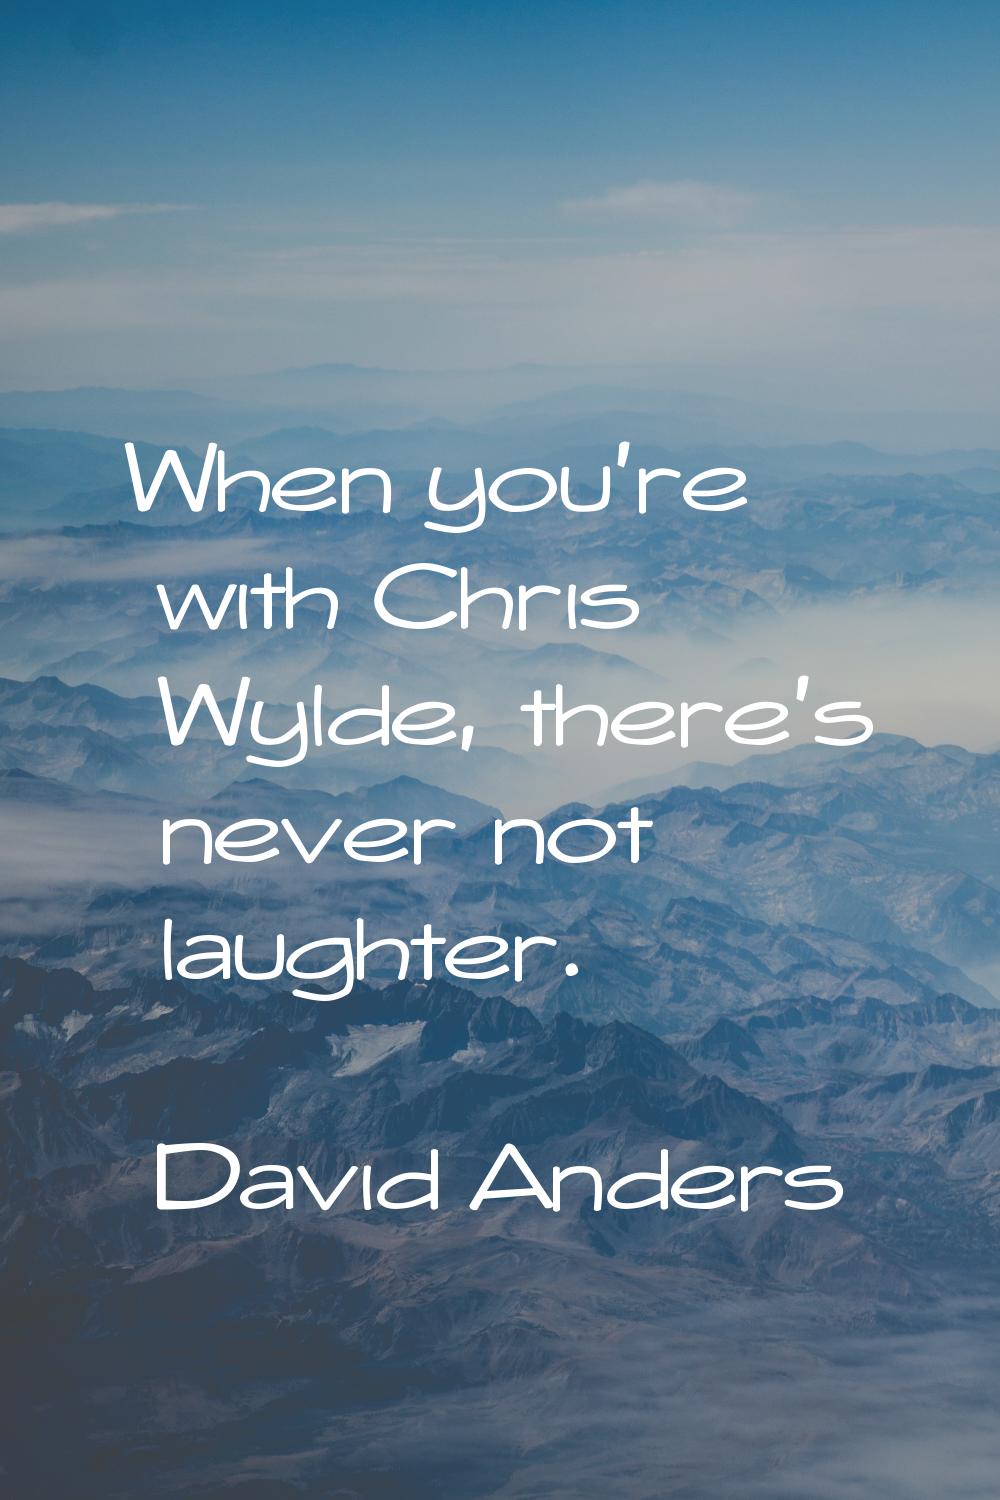 When you're with Chris Wylde, there's never not laughter.